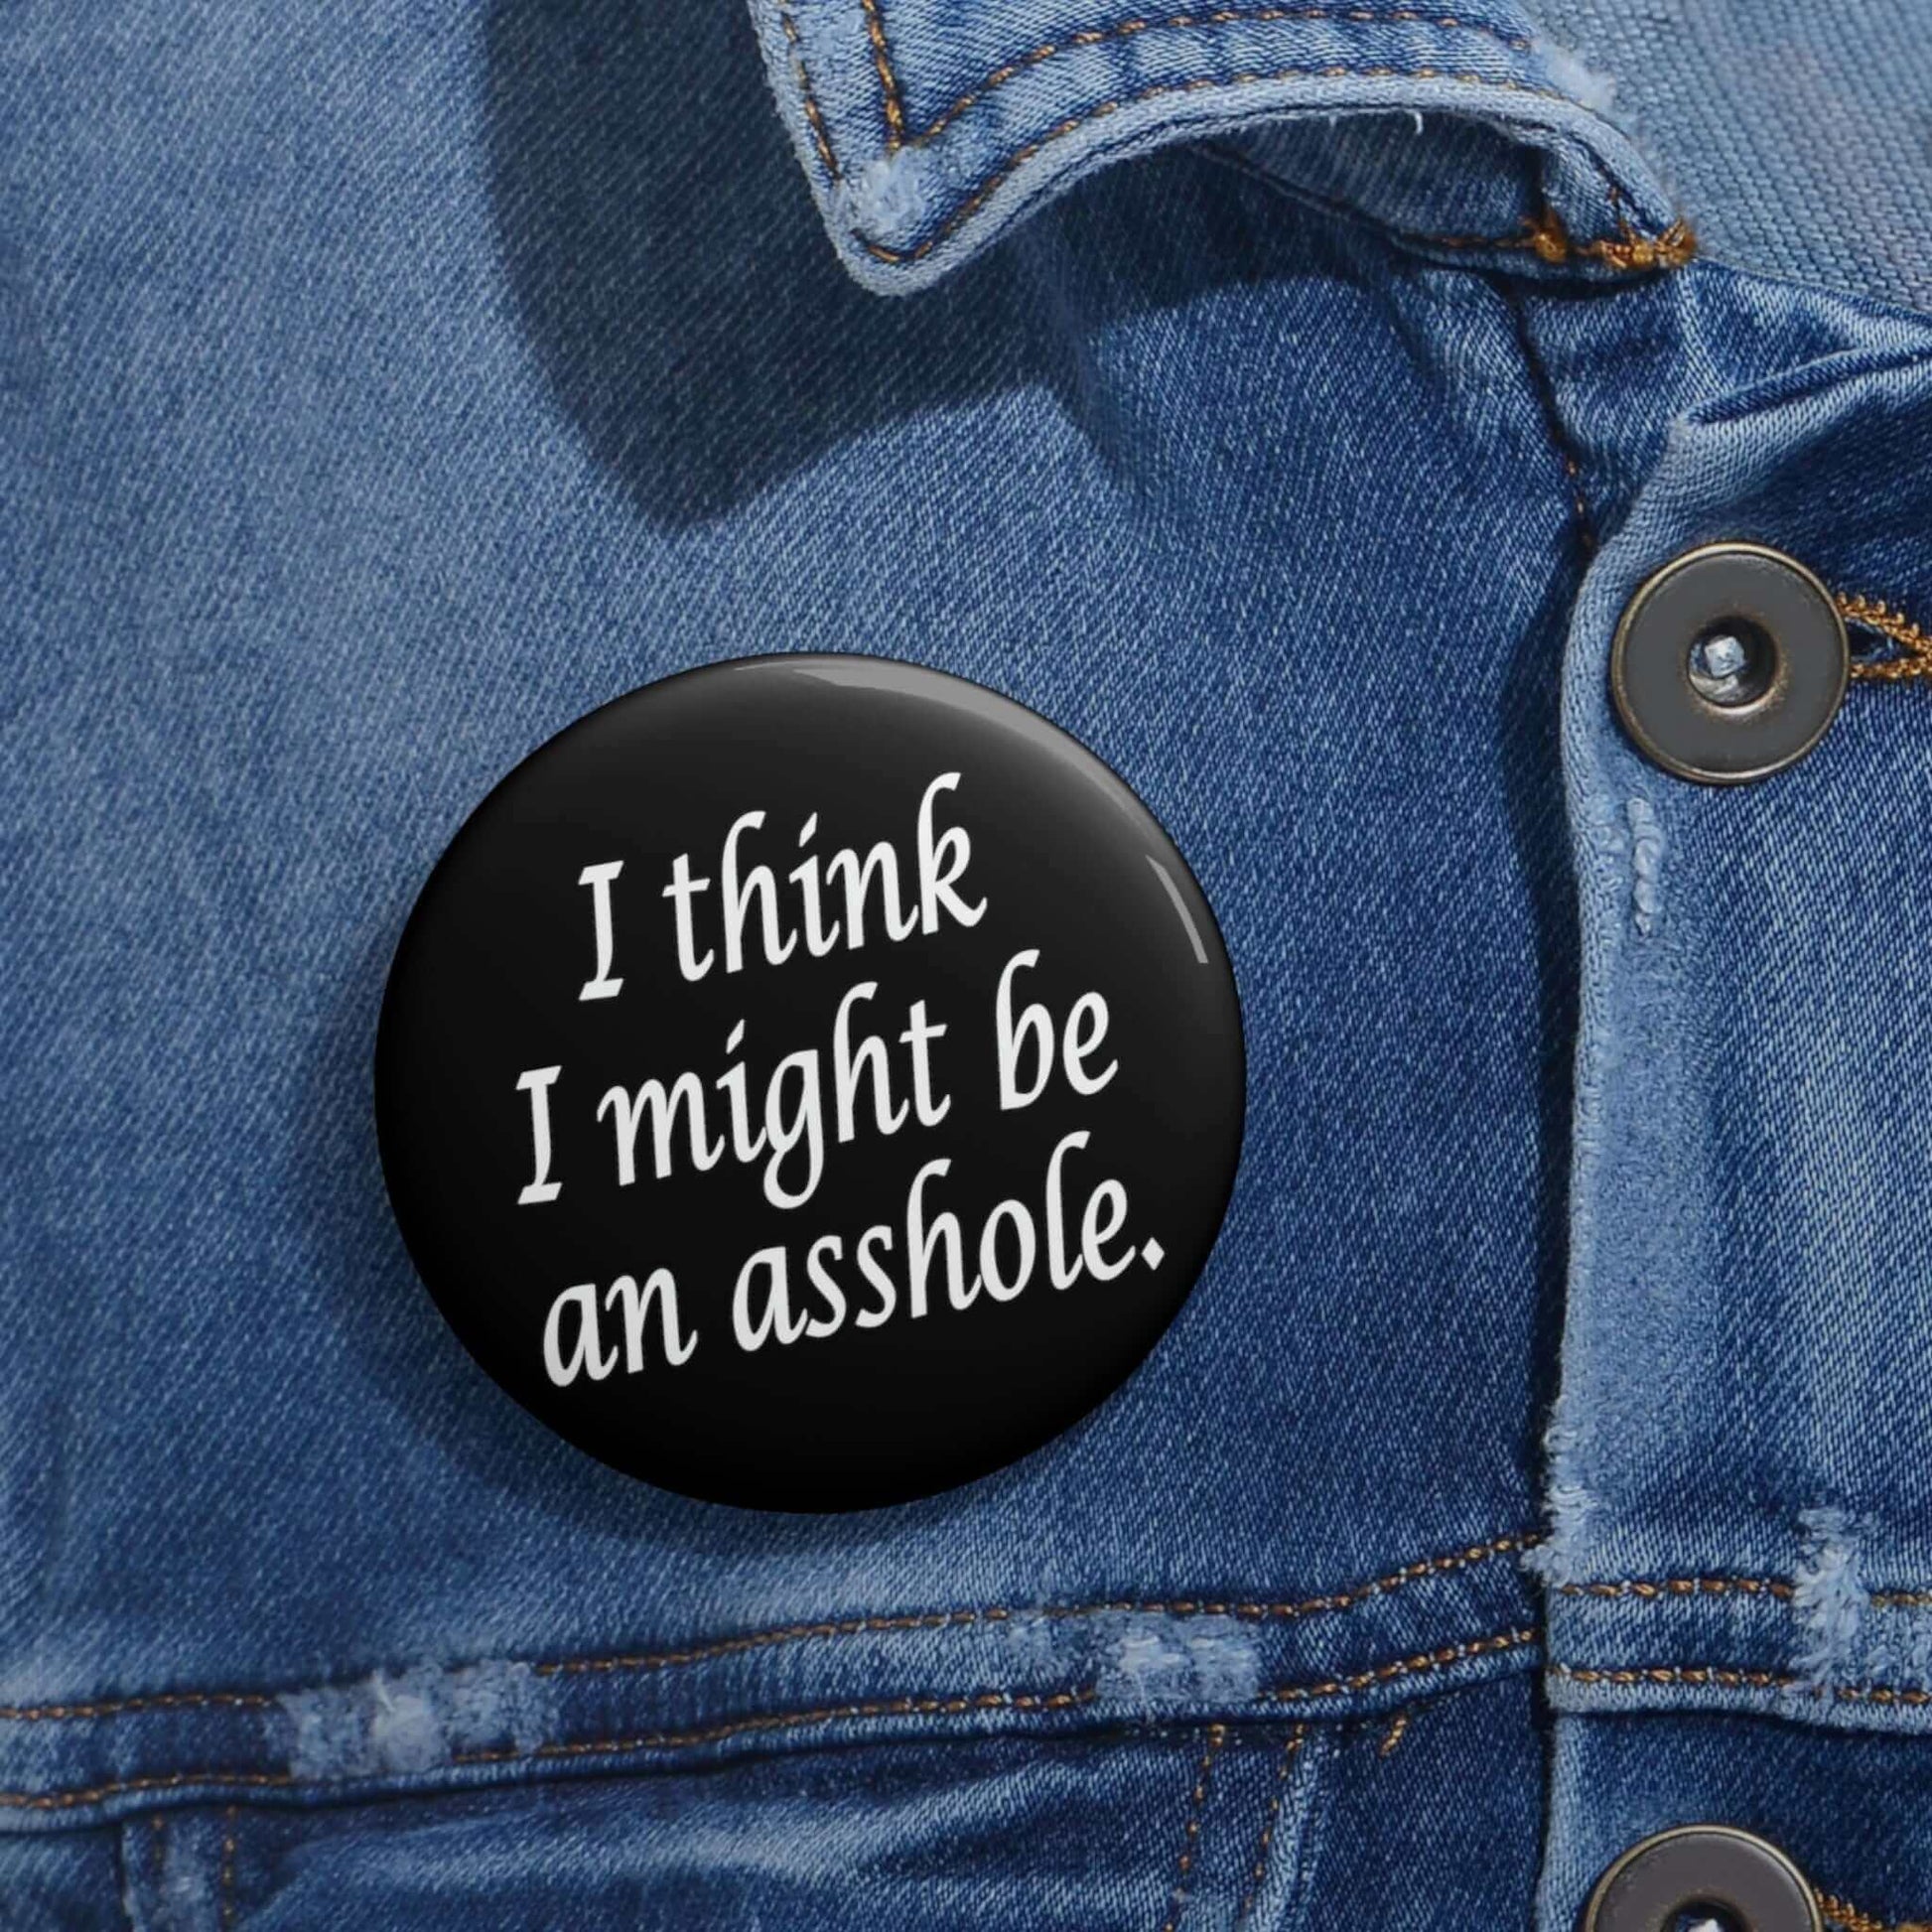 I think I might be an asshole pin-back button.